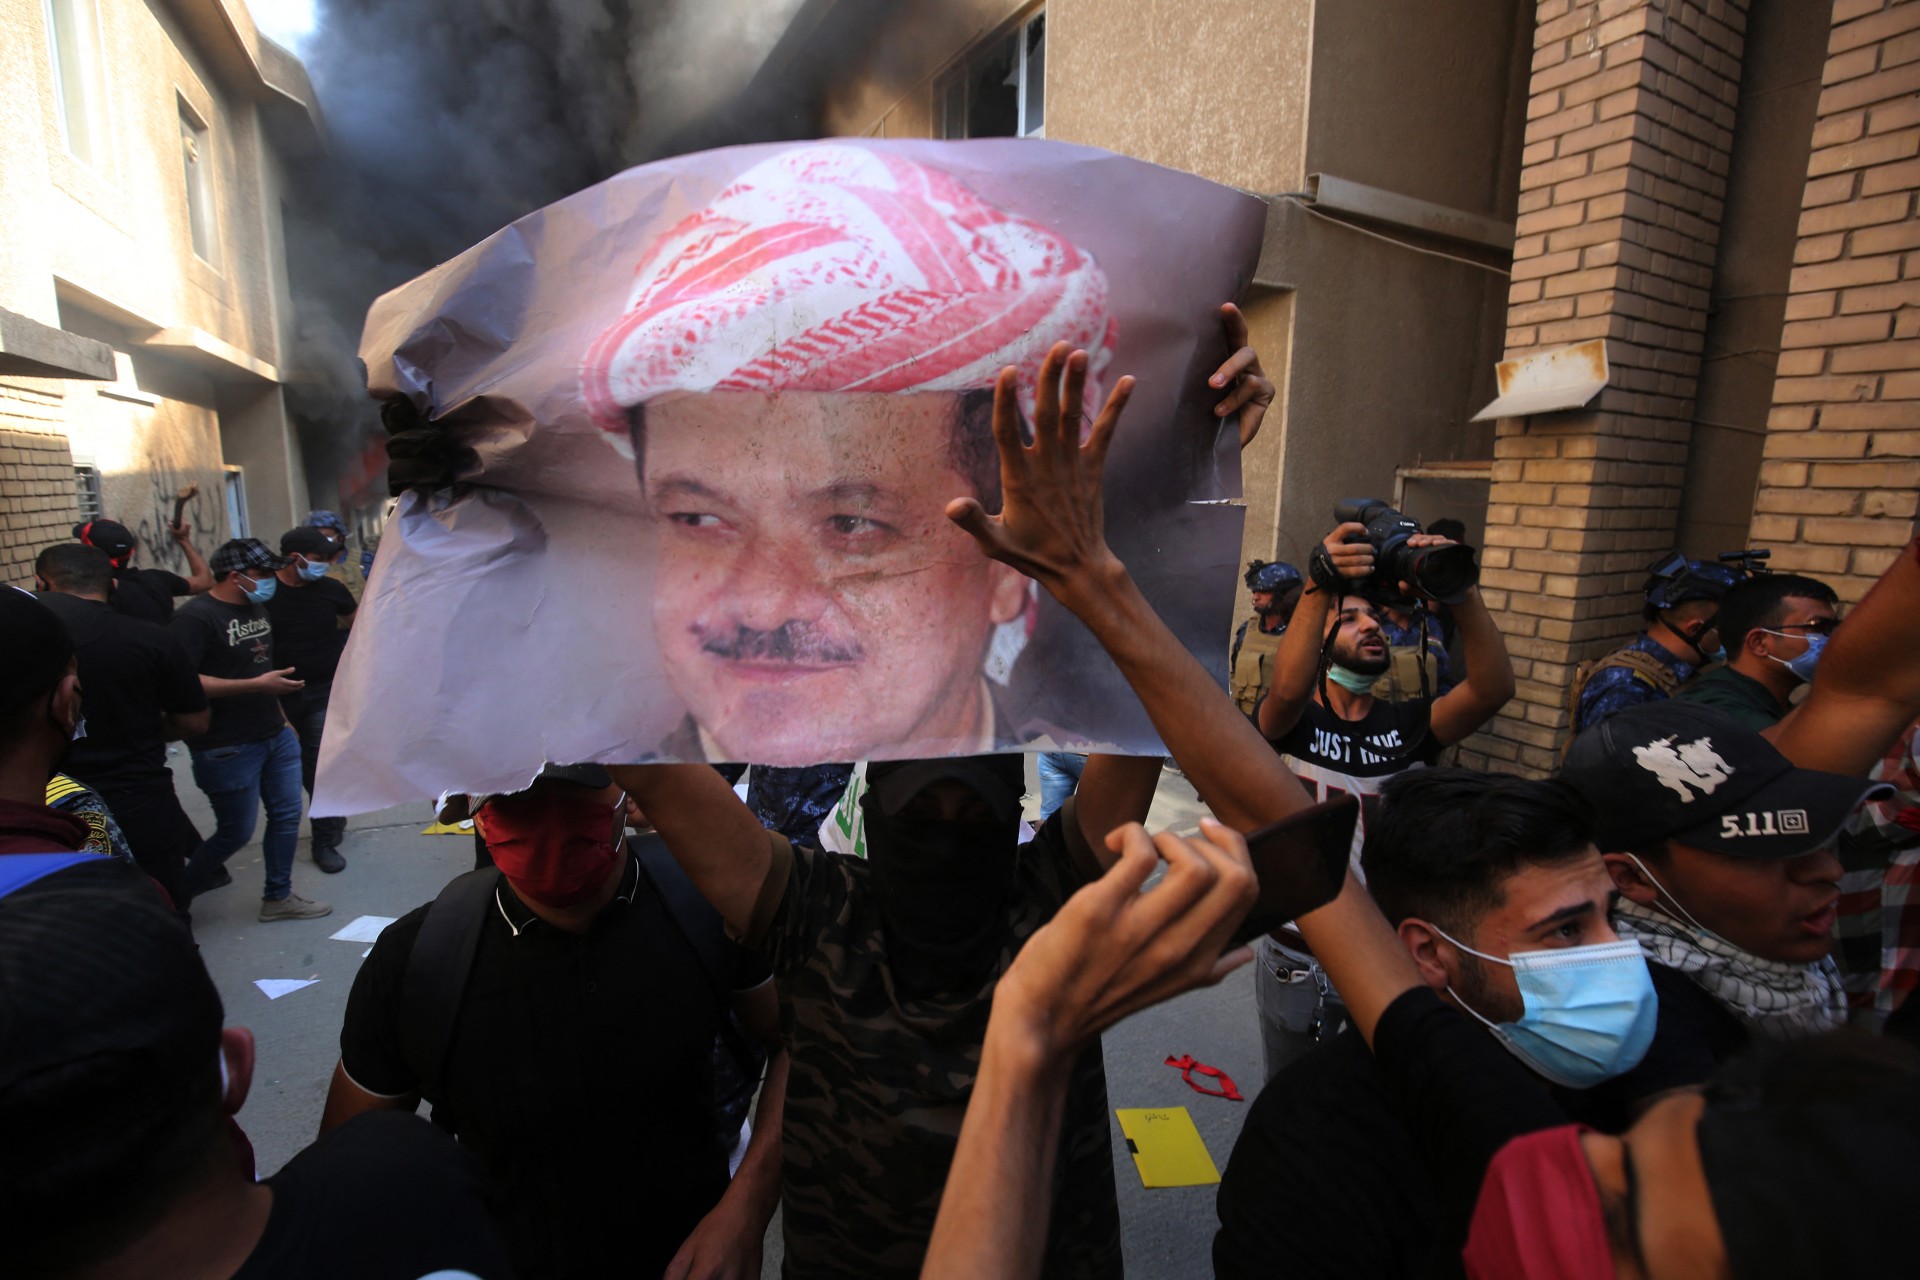 Iraqi supporters of pro-Iranian groups tear up a portrait of Massoud Barzani in Baghdad in October 2020 (AFP)